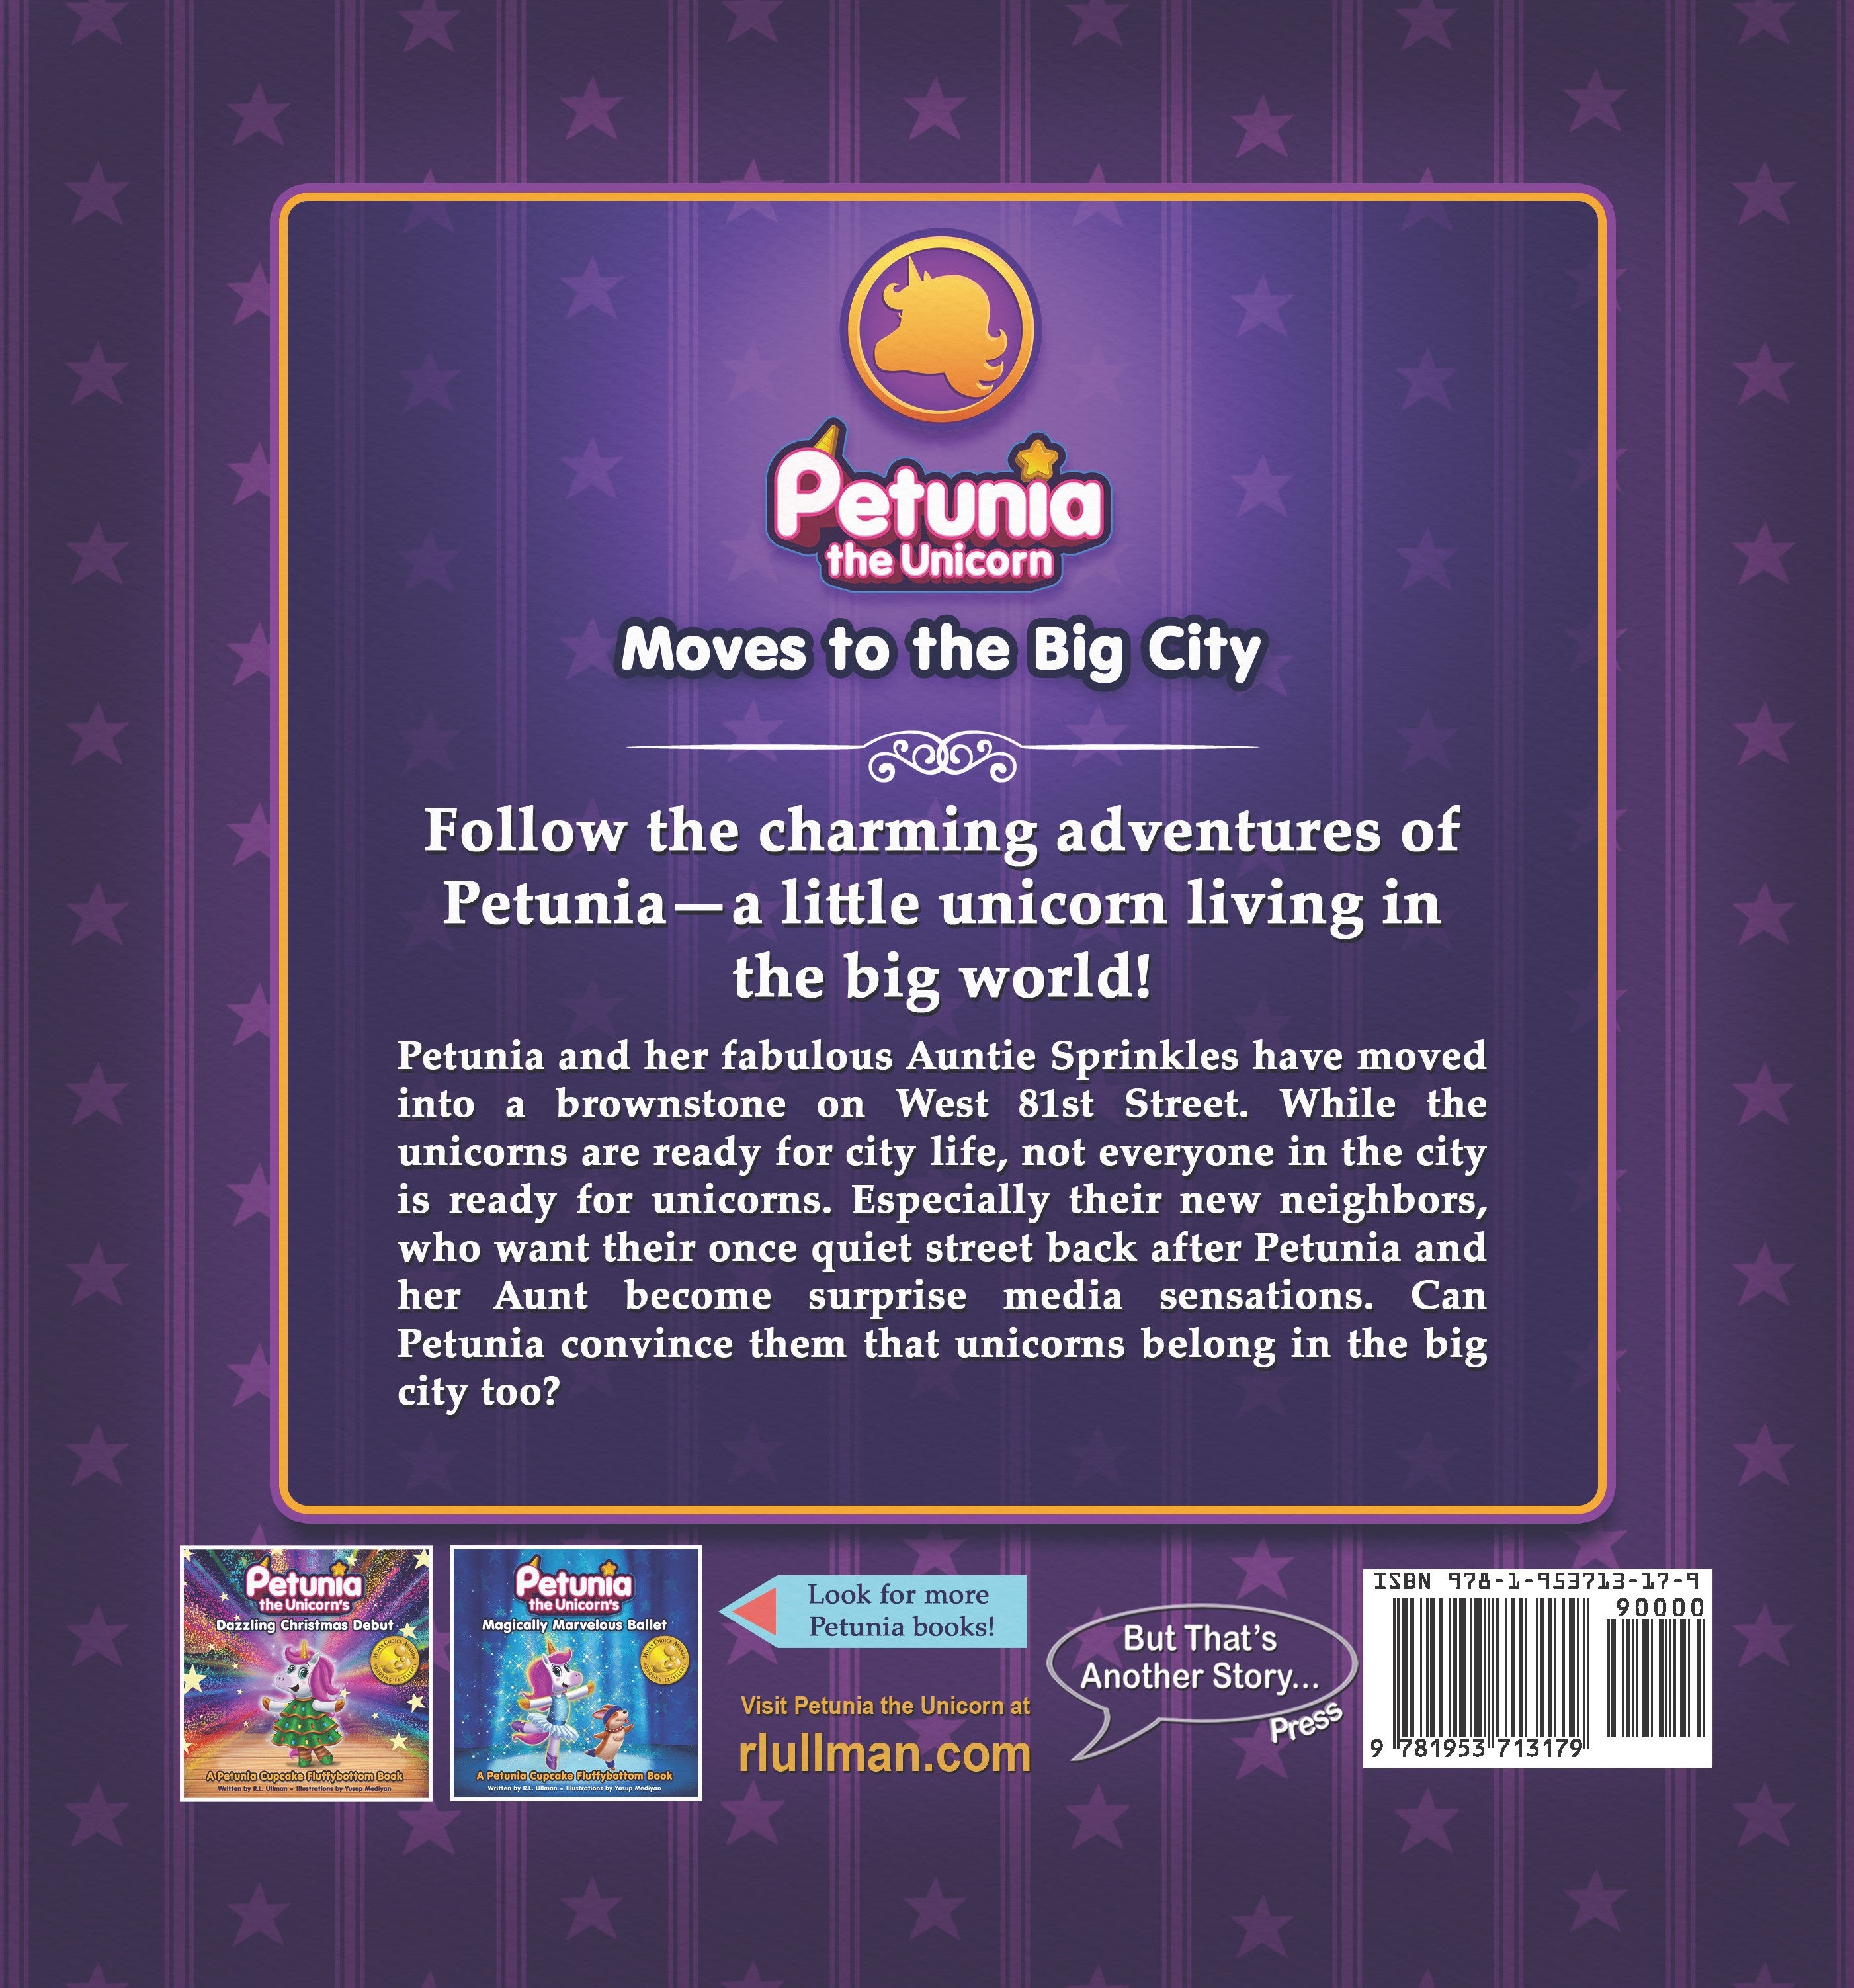 Petunia the Unicorn Moves to the Big City (Signed Hardcover)